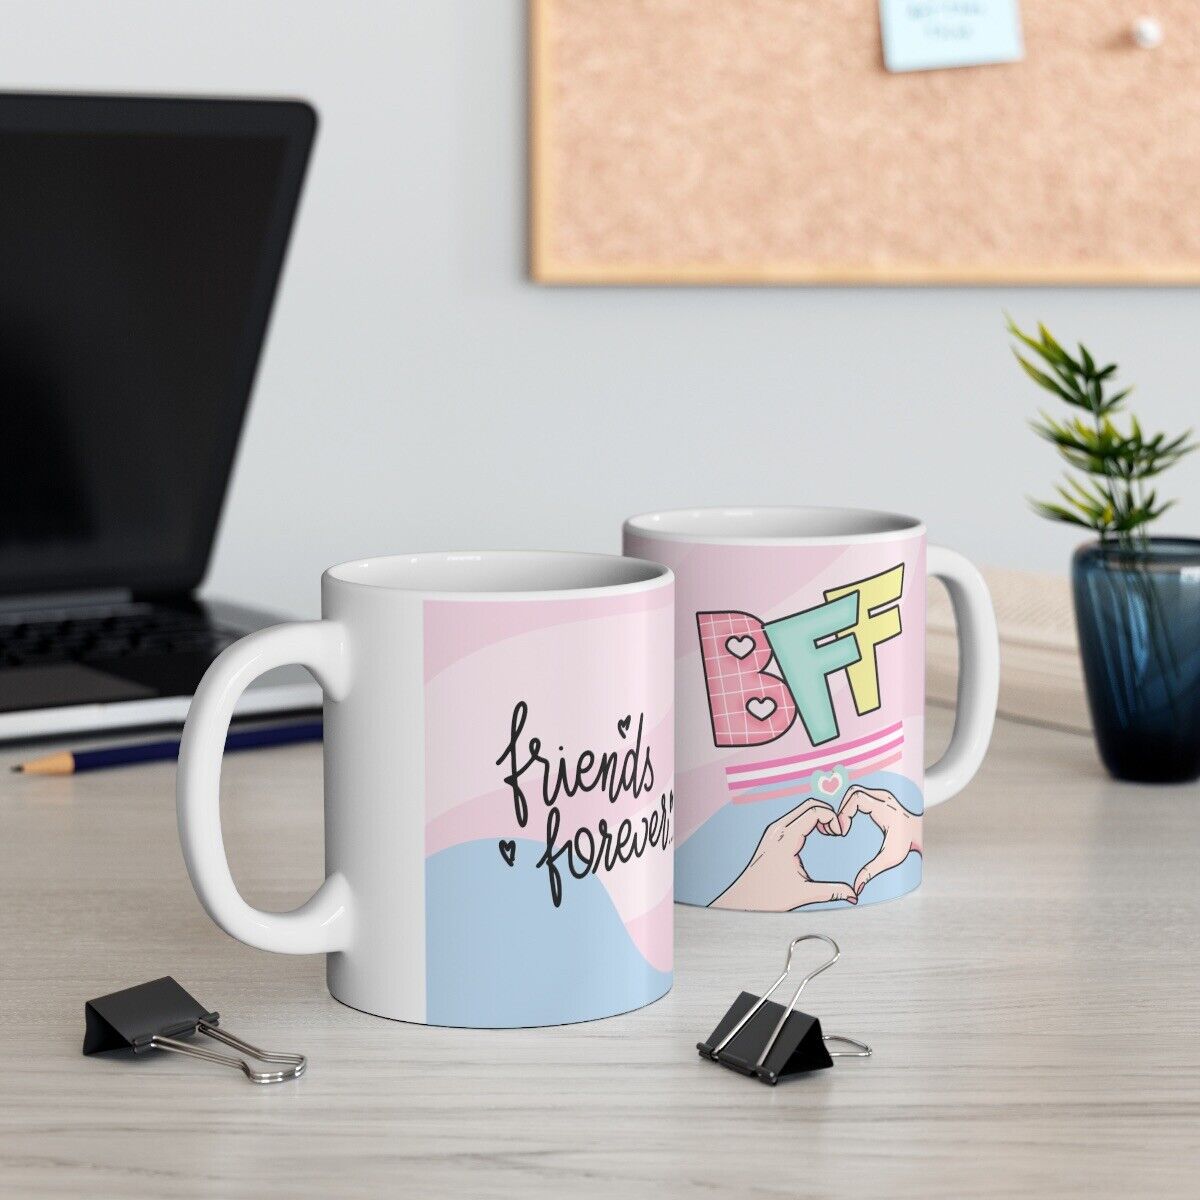 Personalized coffee cup from Besties Forever, personalized gift for friend